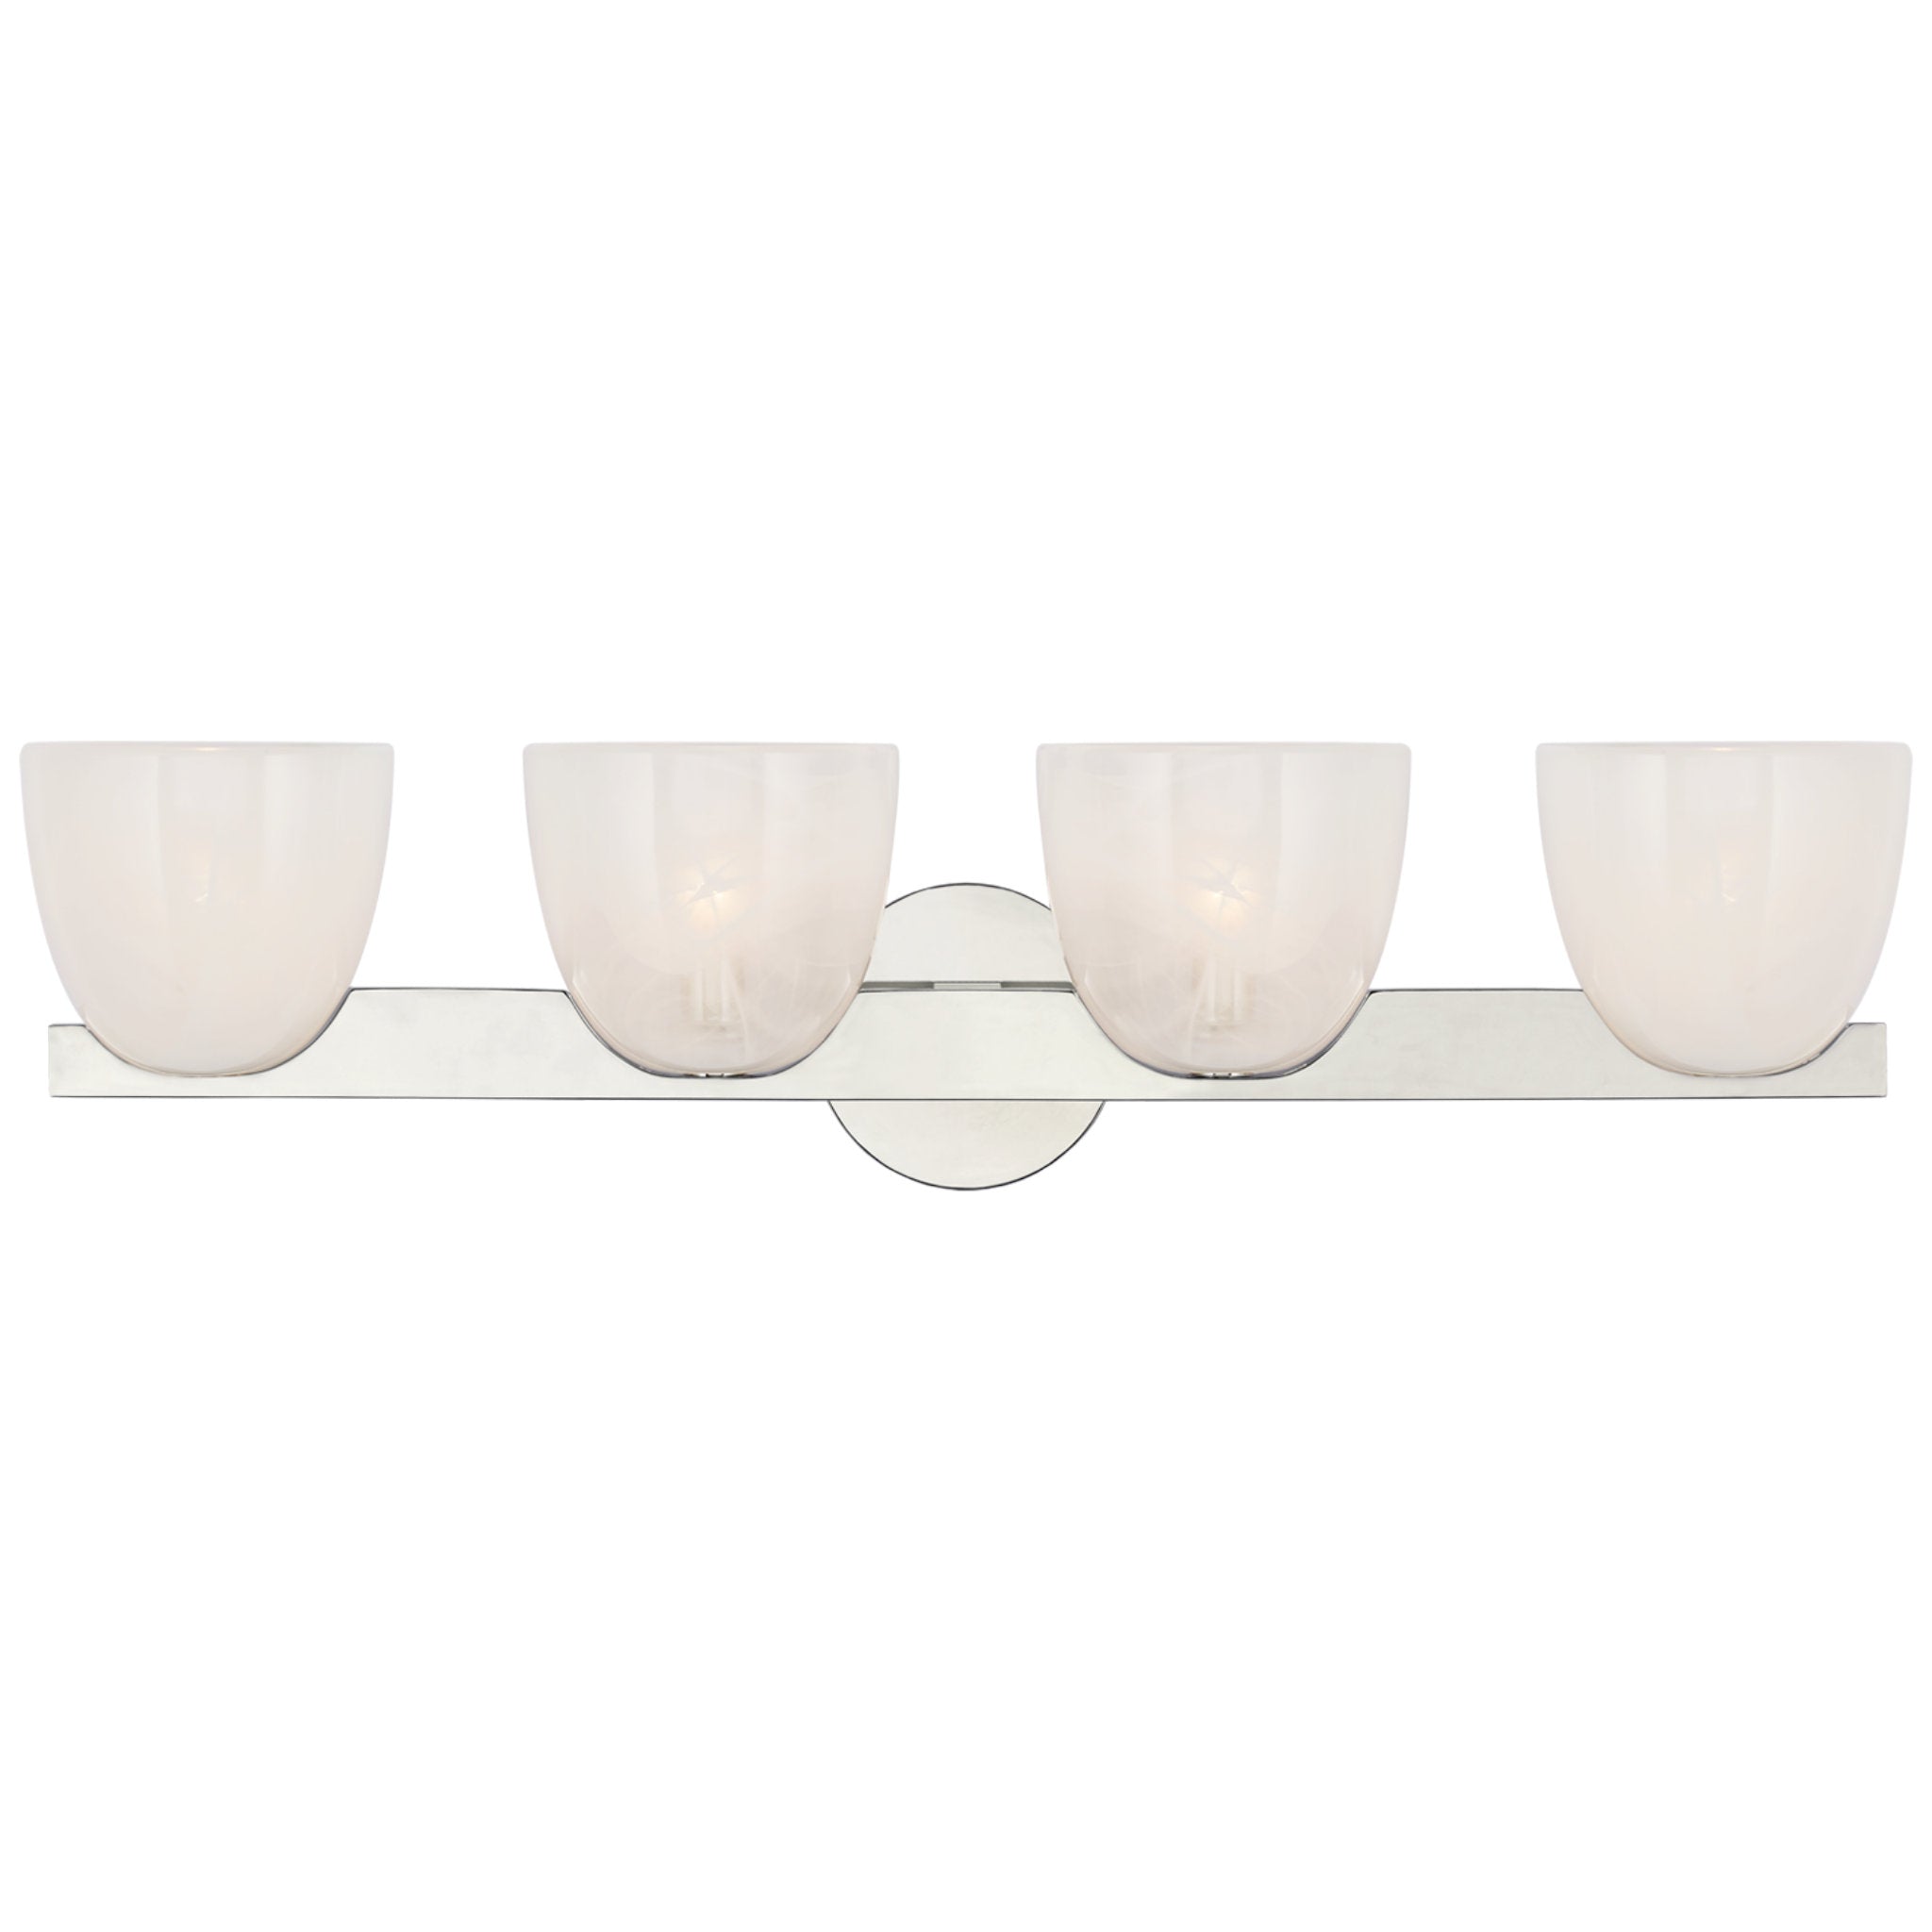 AERIN Carola 4-Light Bath Sconce in Polished Nickel with White Strie Glass